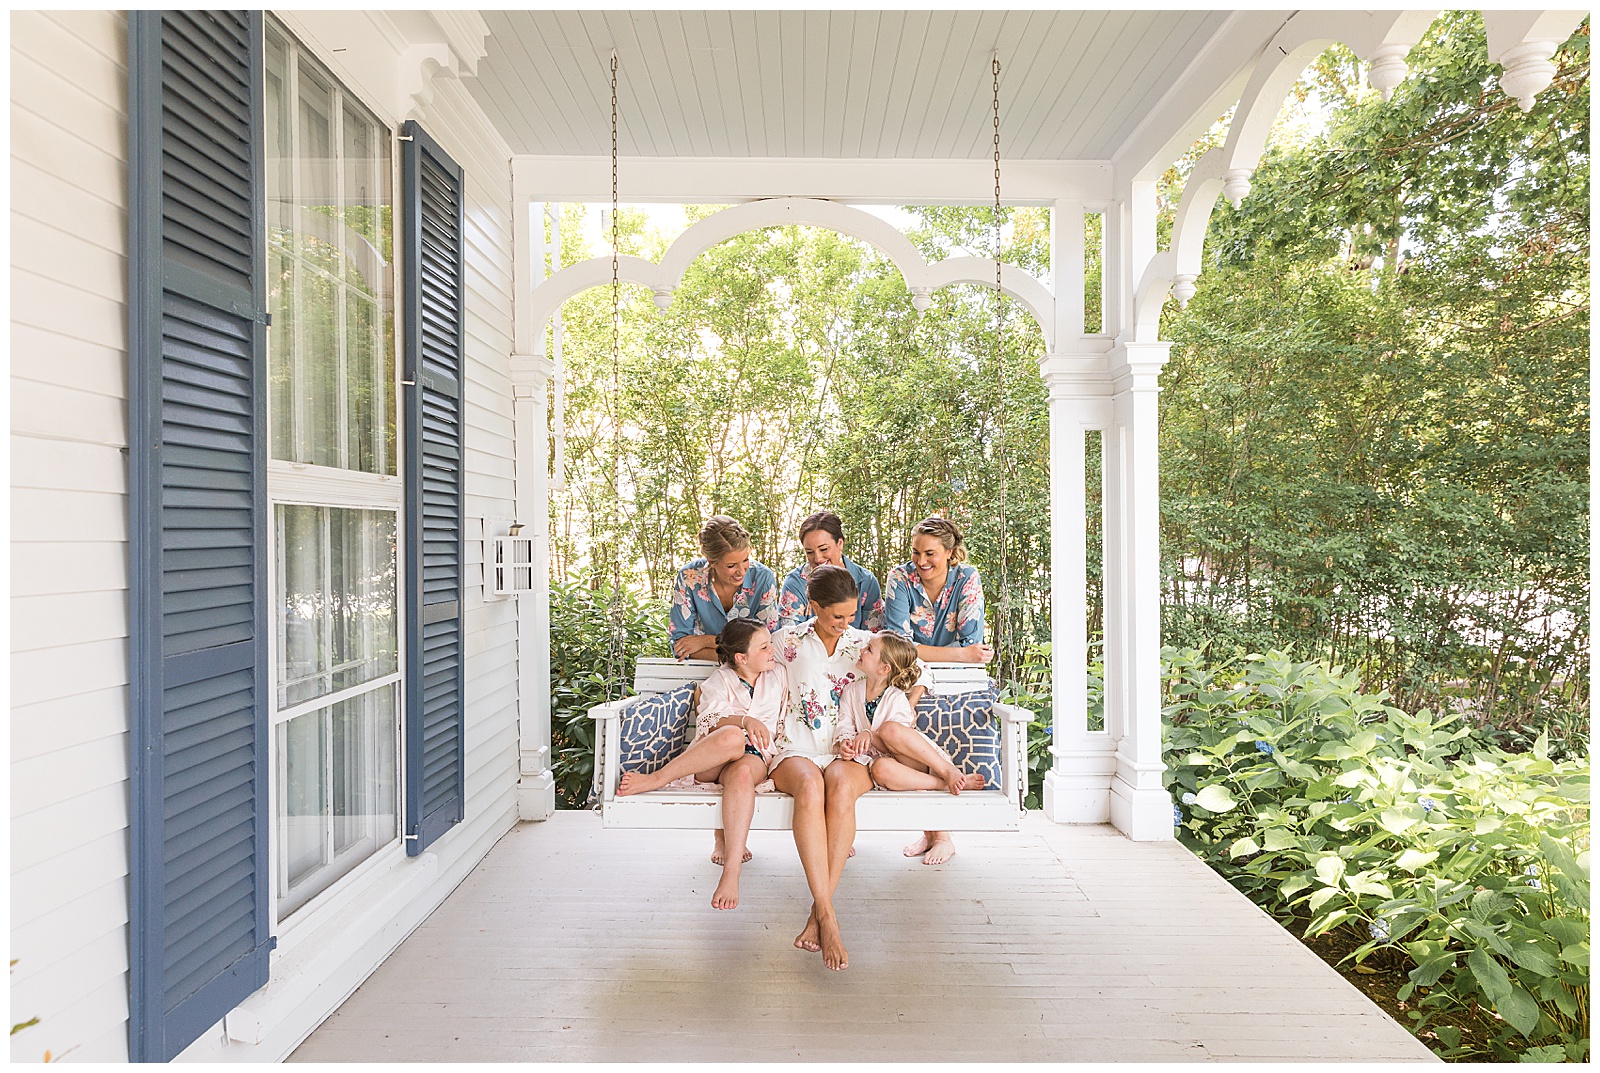 Bridesmaids relax on the front porch swing at the Bayberry Inn